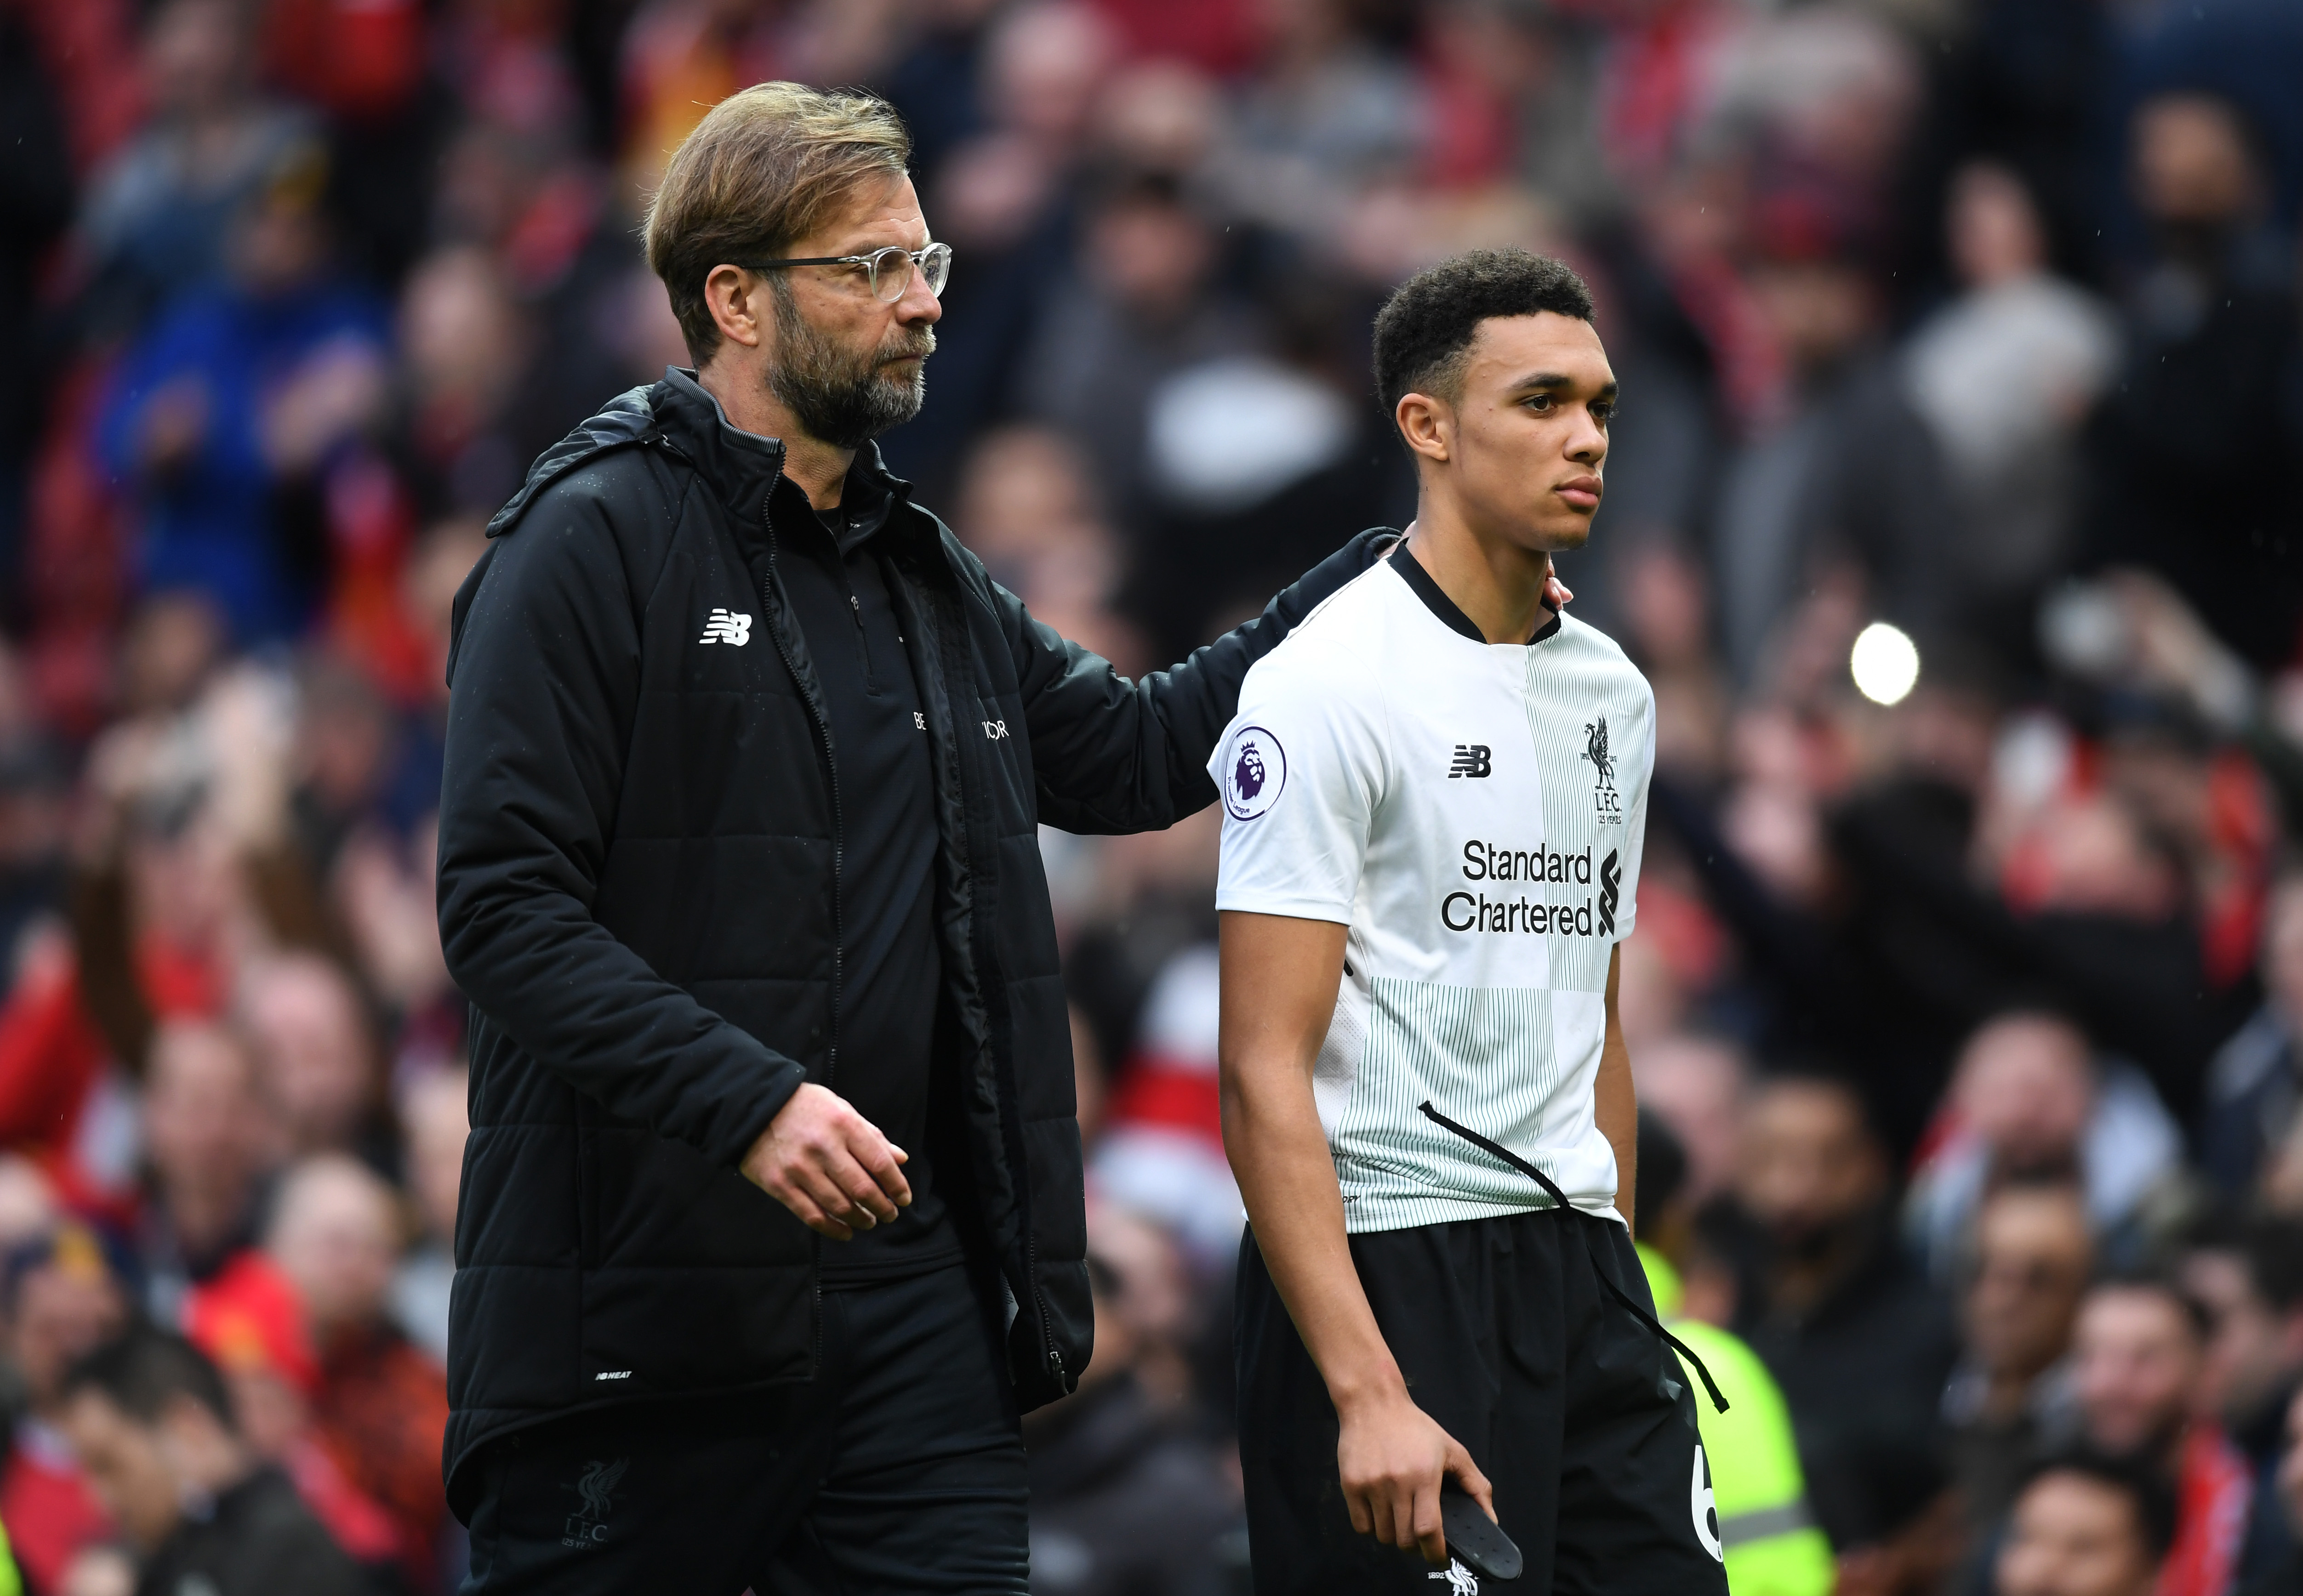 MANCHESTER, ENGLAND - MARCH 10: Trent Alexander-Arnold of Liverpool with Jurgen Klopp, Manager of Liverpool after the Premier League match between Manchester United and Liverpool at Old Trafford on March 10, 2018 in Manchester, England.  (Photo by Michael Regan/Getty Images)